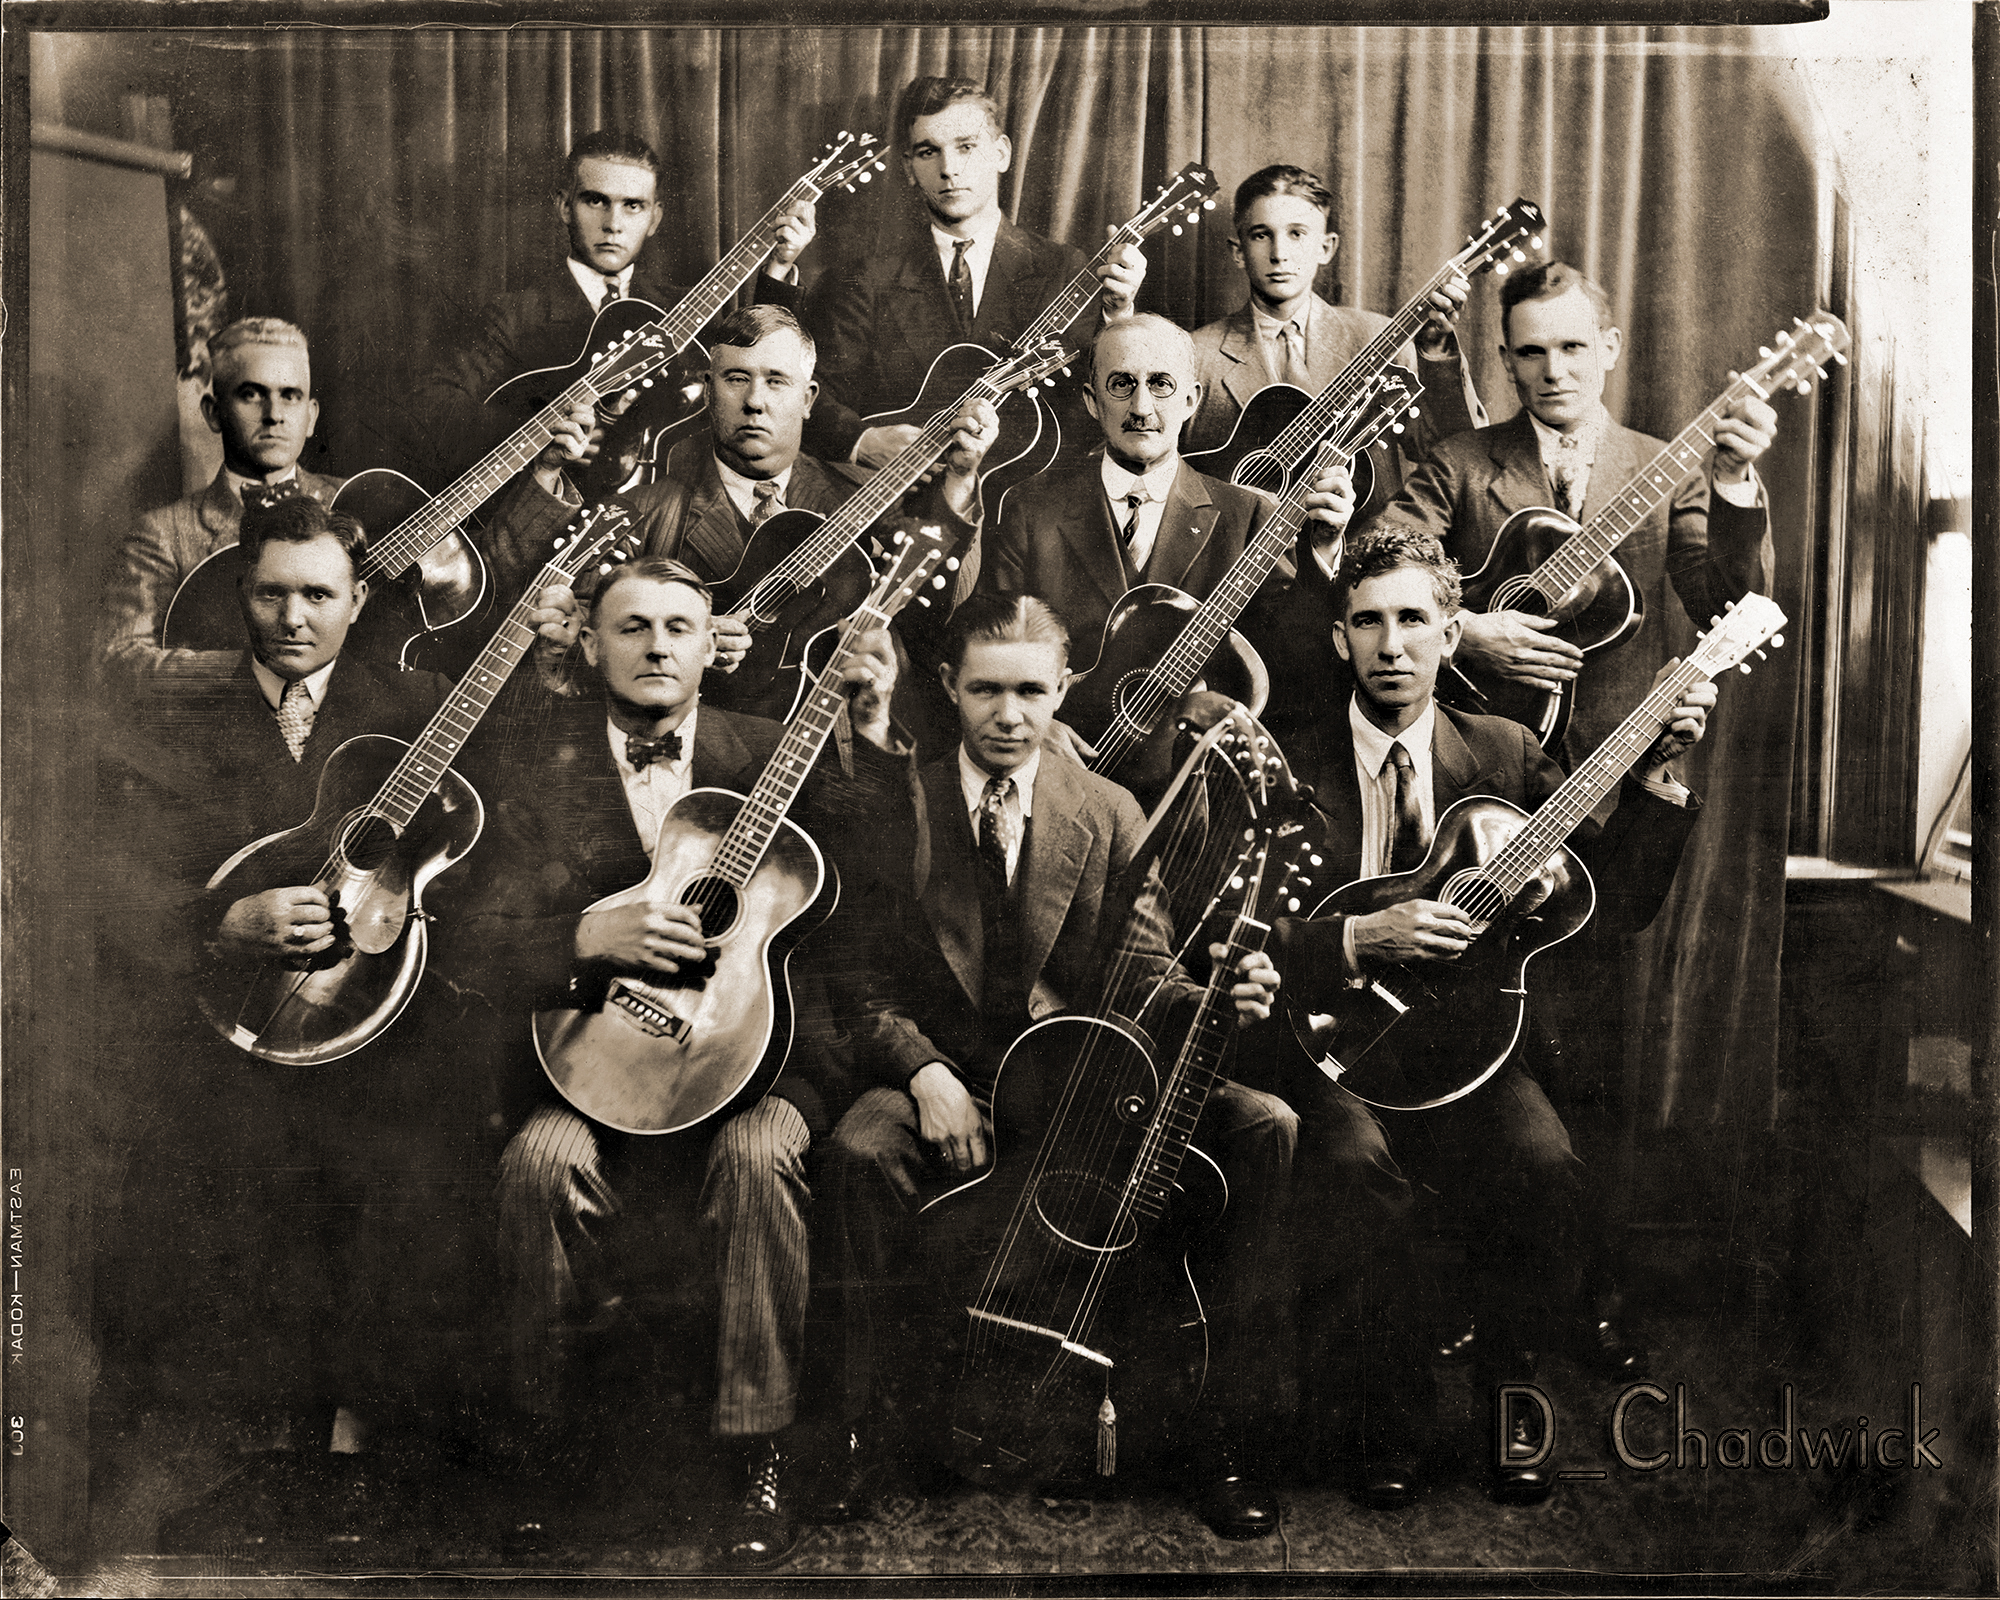 With the exception of the Gibson Harp Guitar they’re all Gibson L series acoustic guitars with “The Gibson” logo either at an angle or straight across the headstock. It's interesting that they're all posed playing an open D chord.  The original mat is stamped “New York Studio, Huntington W.Va”.  Scanned from the original 8x10 print. View full size.